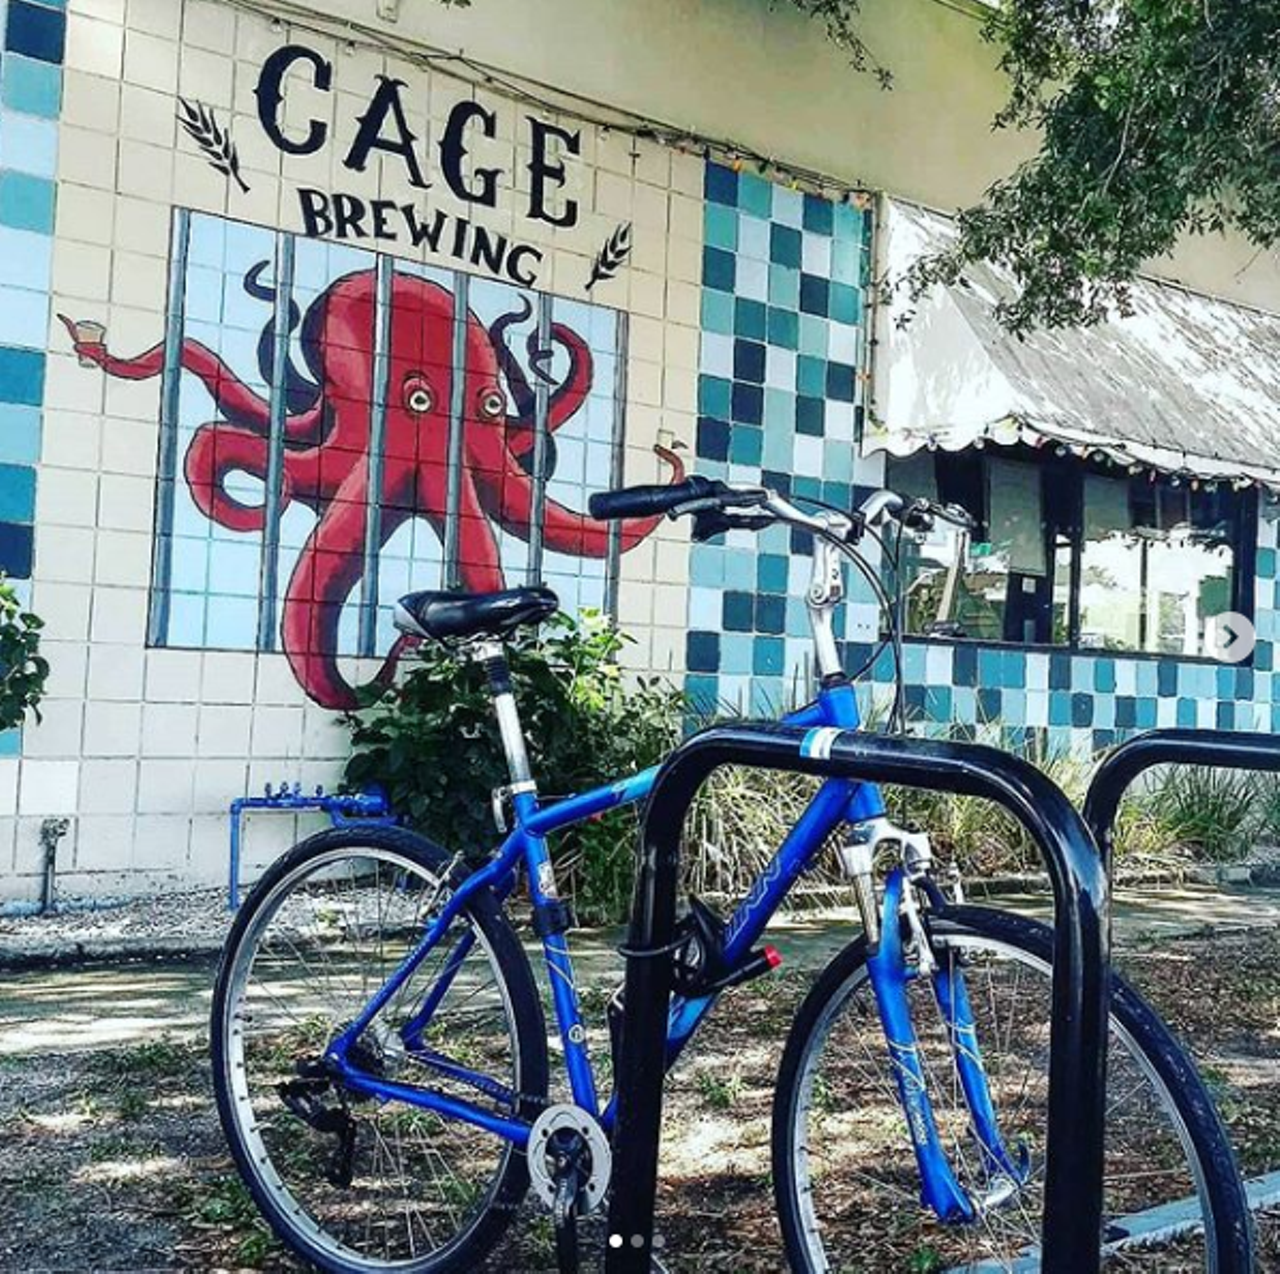 Cage Brewing
2001 First Ave. S, St. Petersburg. 727-201-4278
Cage Brewing is still offering takeout orders. You can purchase growlers, or have your growlers refilled from 2 p.m. to 8 p.m. Monday through Thursday, and 12 p.m. to 8 p.m. Friday through Sunday.
Photo via  Cage Brewing&#146;s Instagram